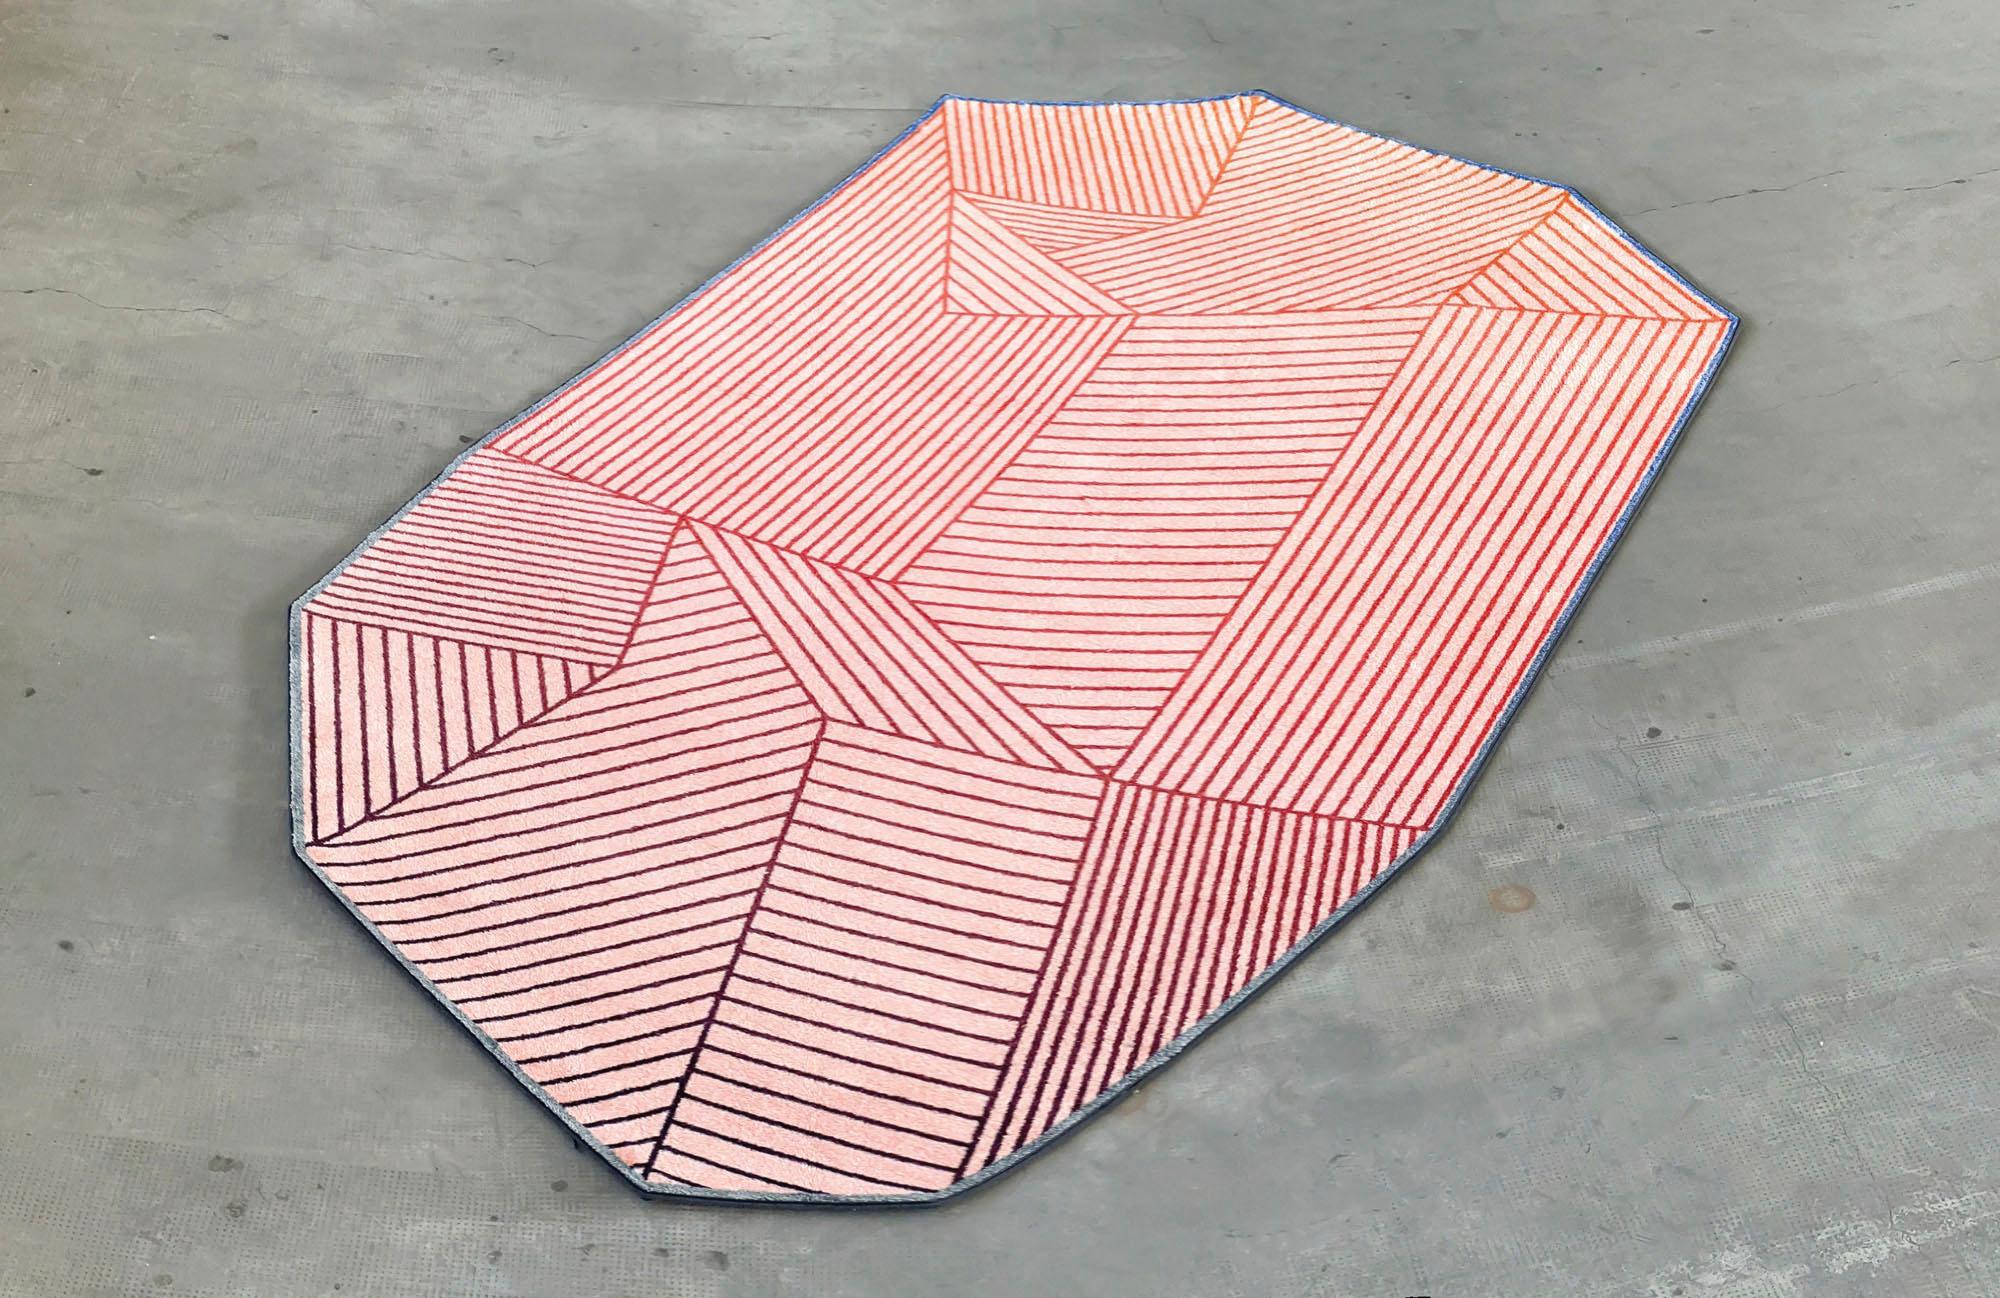 AlTappeto is the new collection of rugs designed by Enrico Girotti for lapiegaWD.
Tiny dashes that fade into gradient colors, fill the entire shape of the carpet with an unusual shape.
AlTappeto dimension are 178 cm x 300 cm is washable, reproof